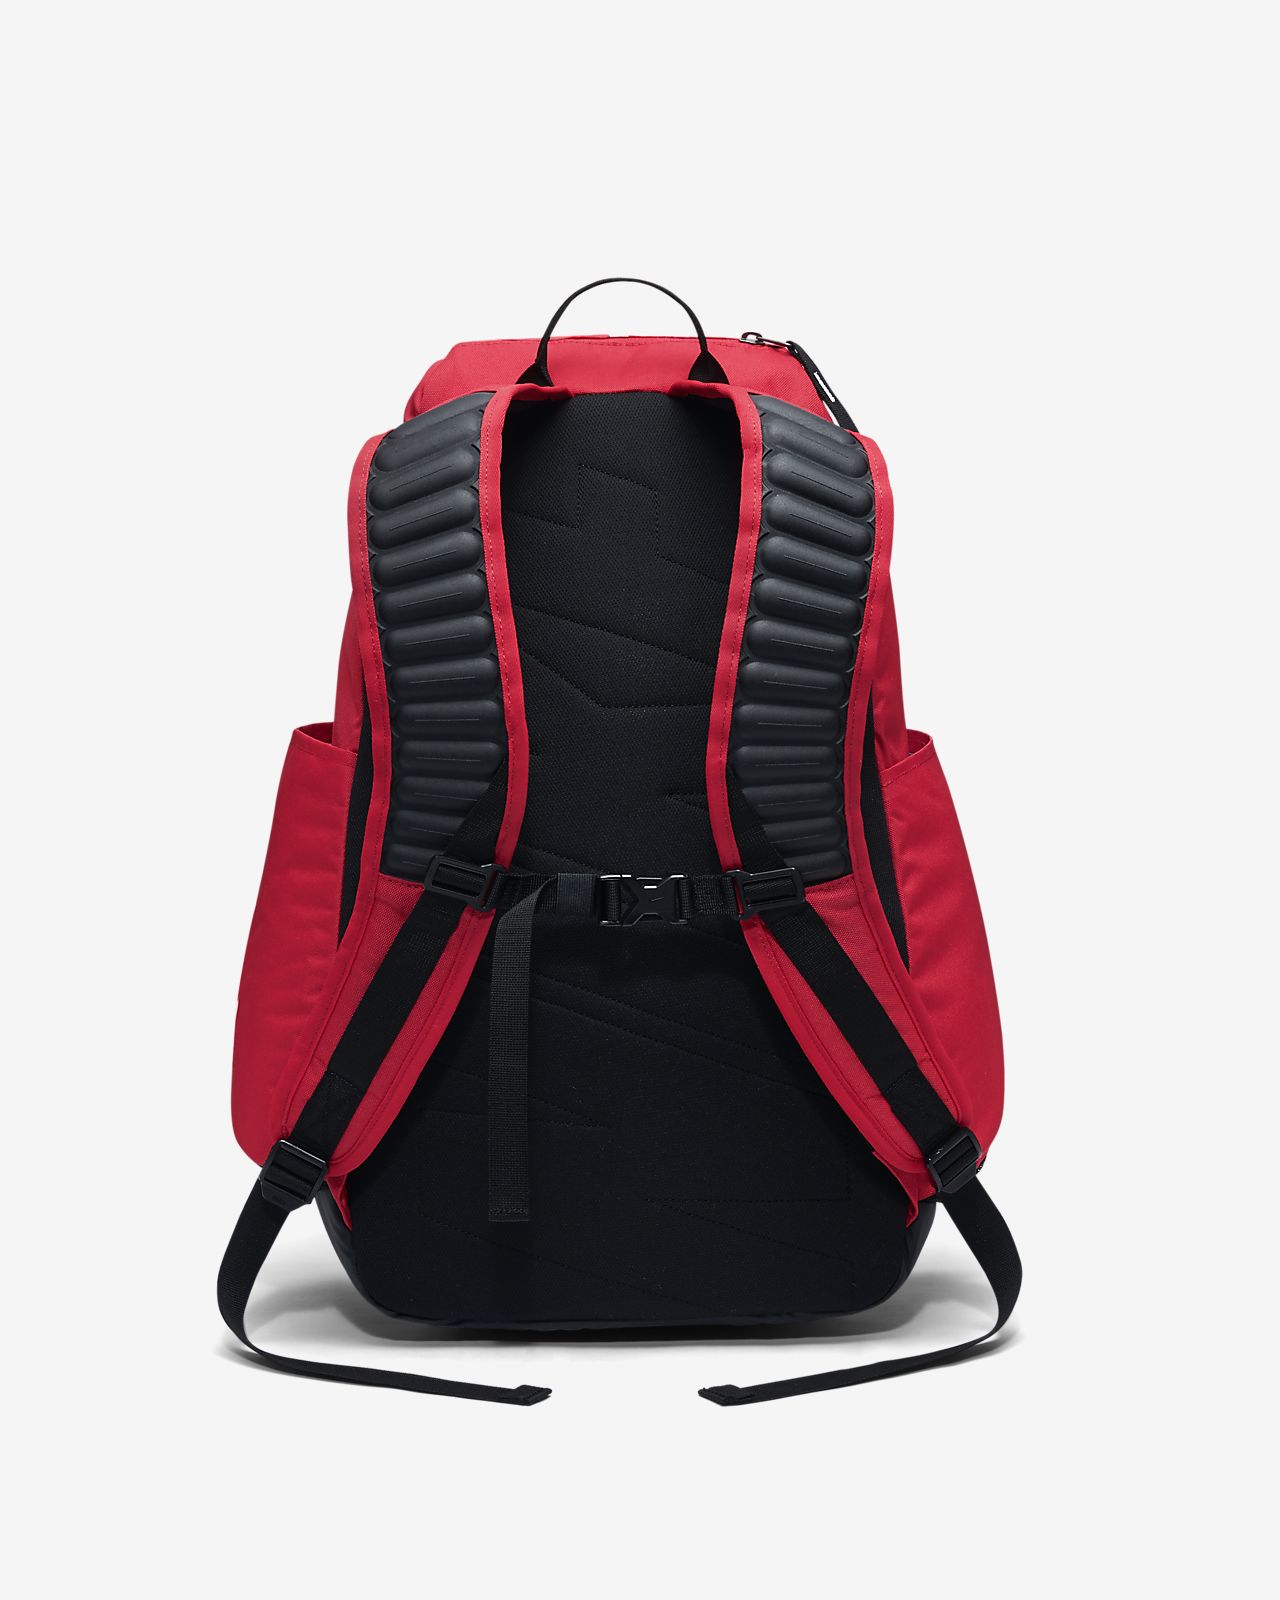 nike bubble backpack on sale 9aede 57a8b